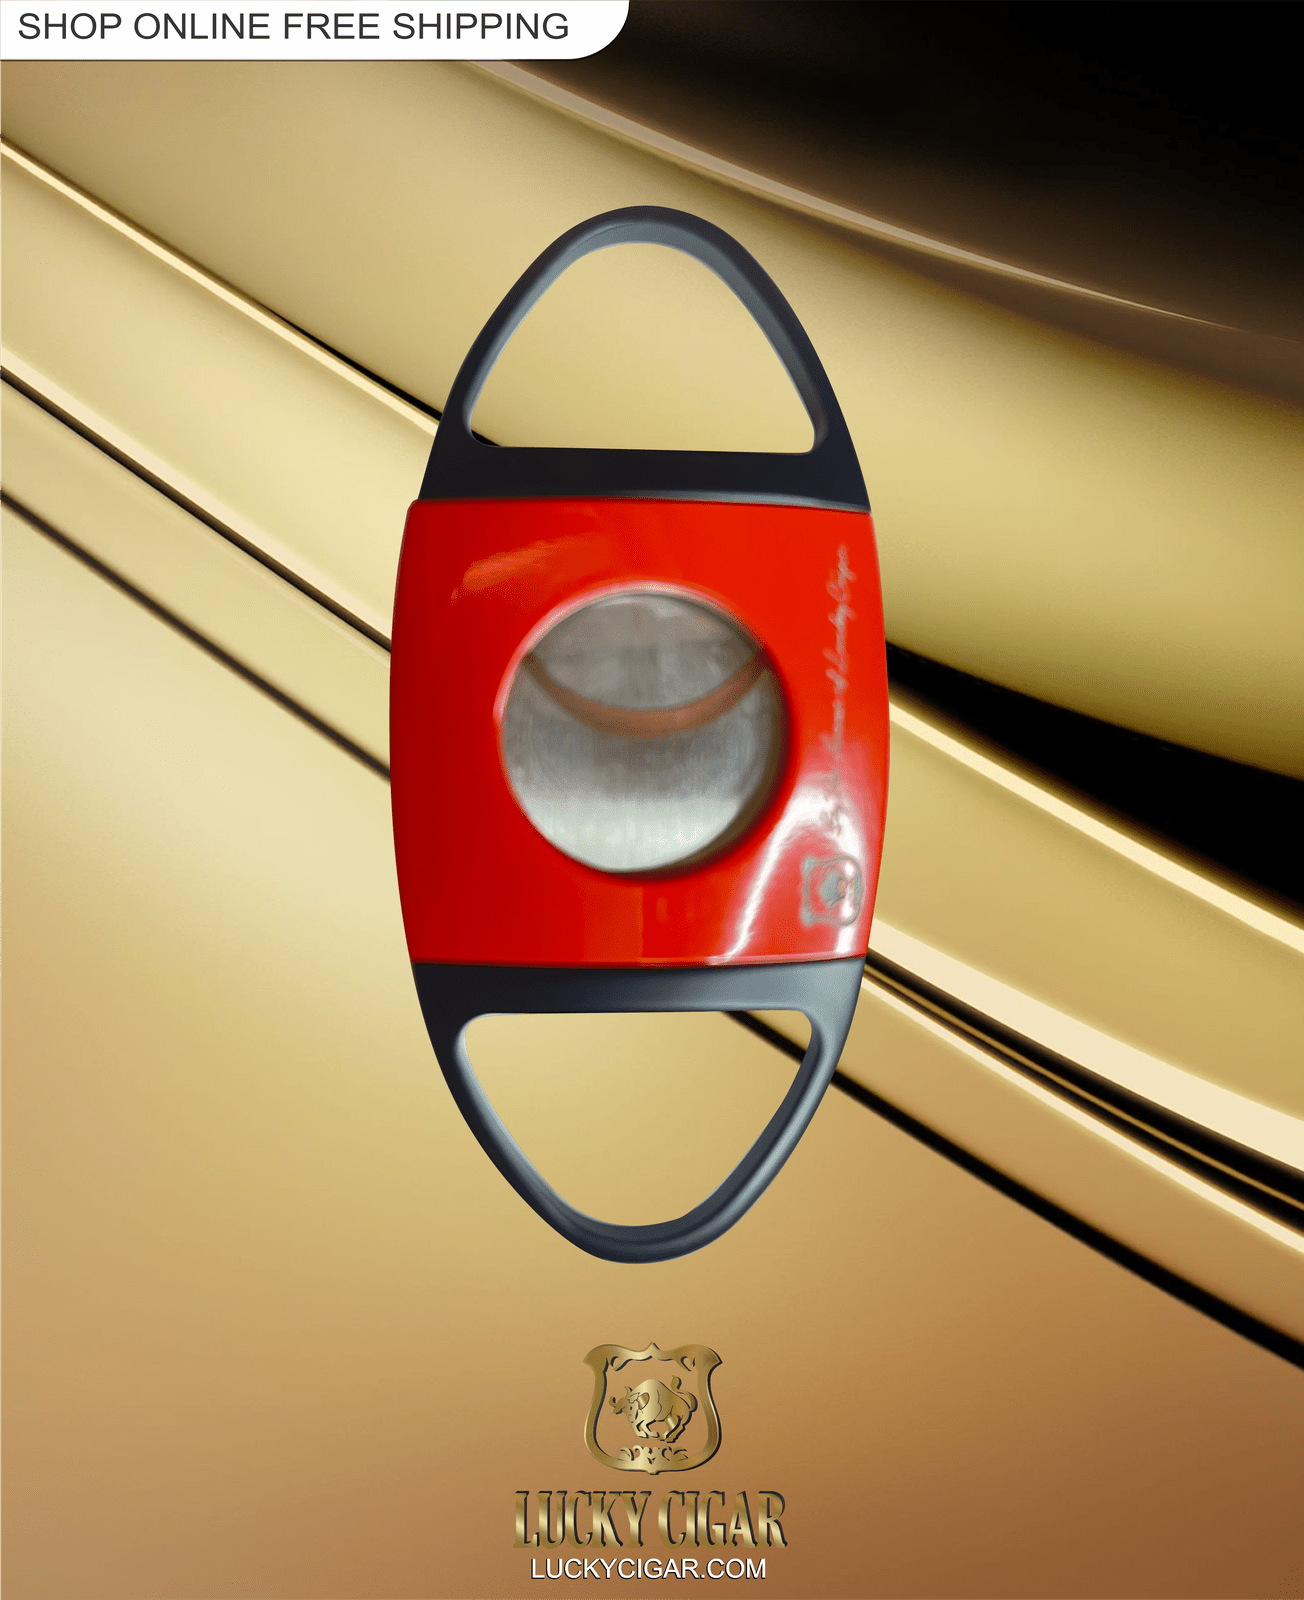 Cigar Lifestyle Accessories: Cigar Cutter in Red